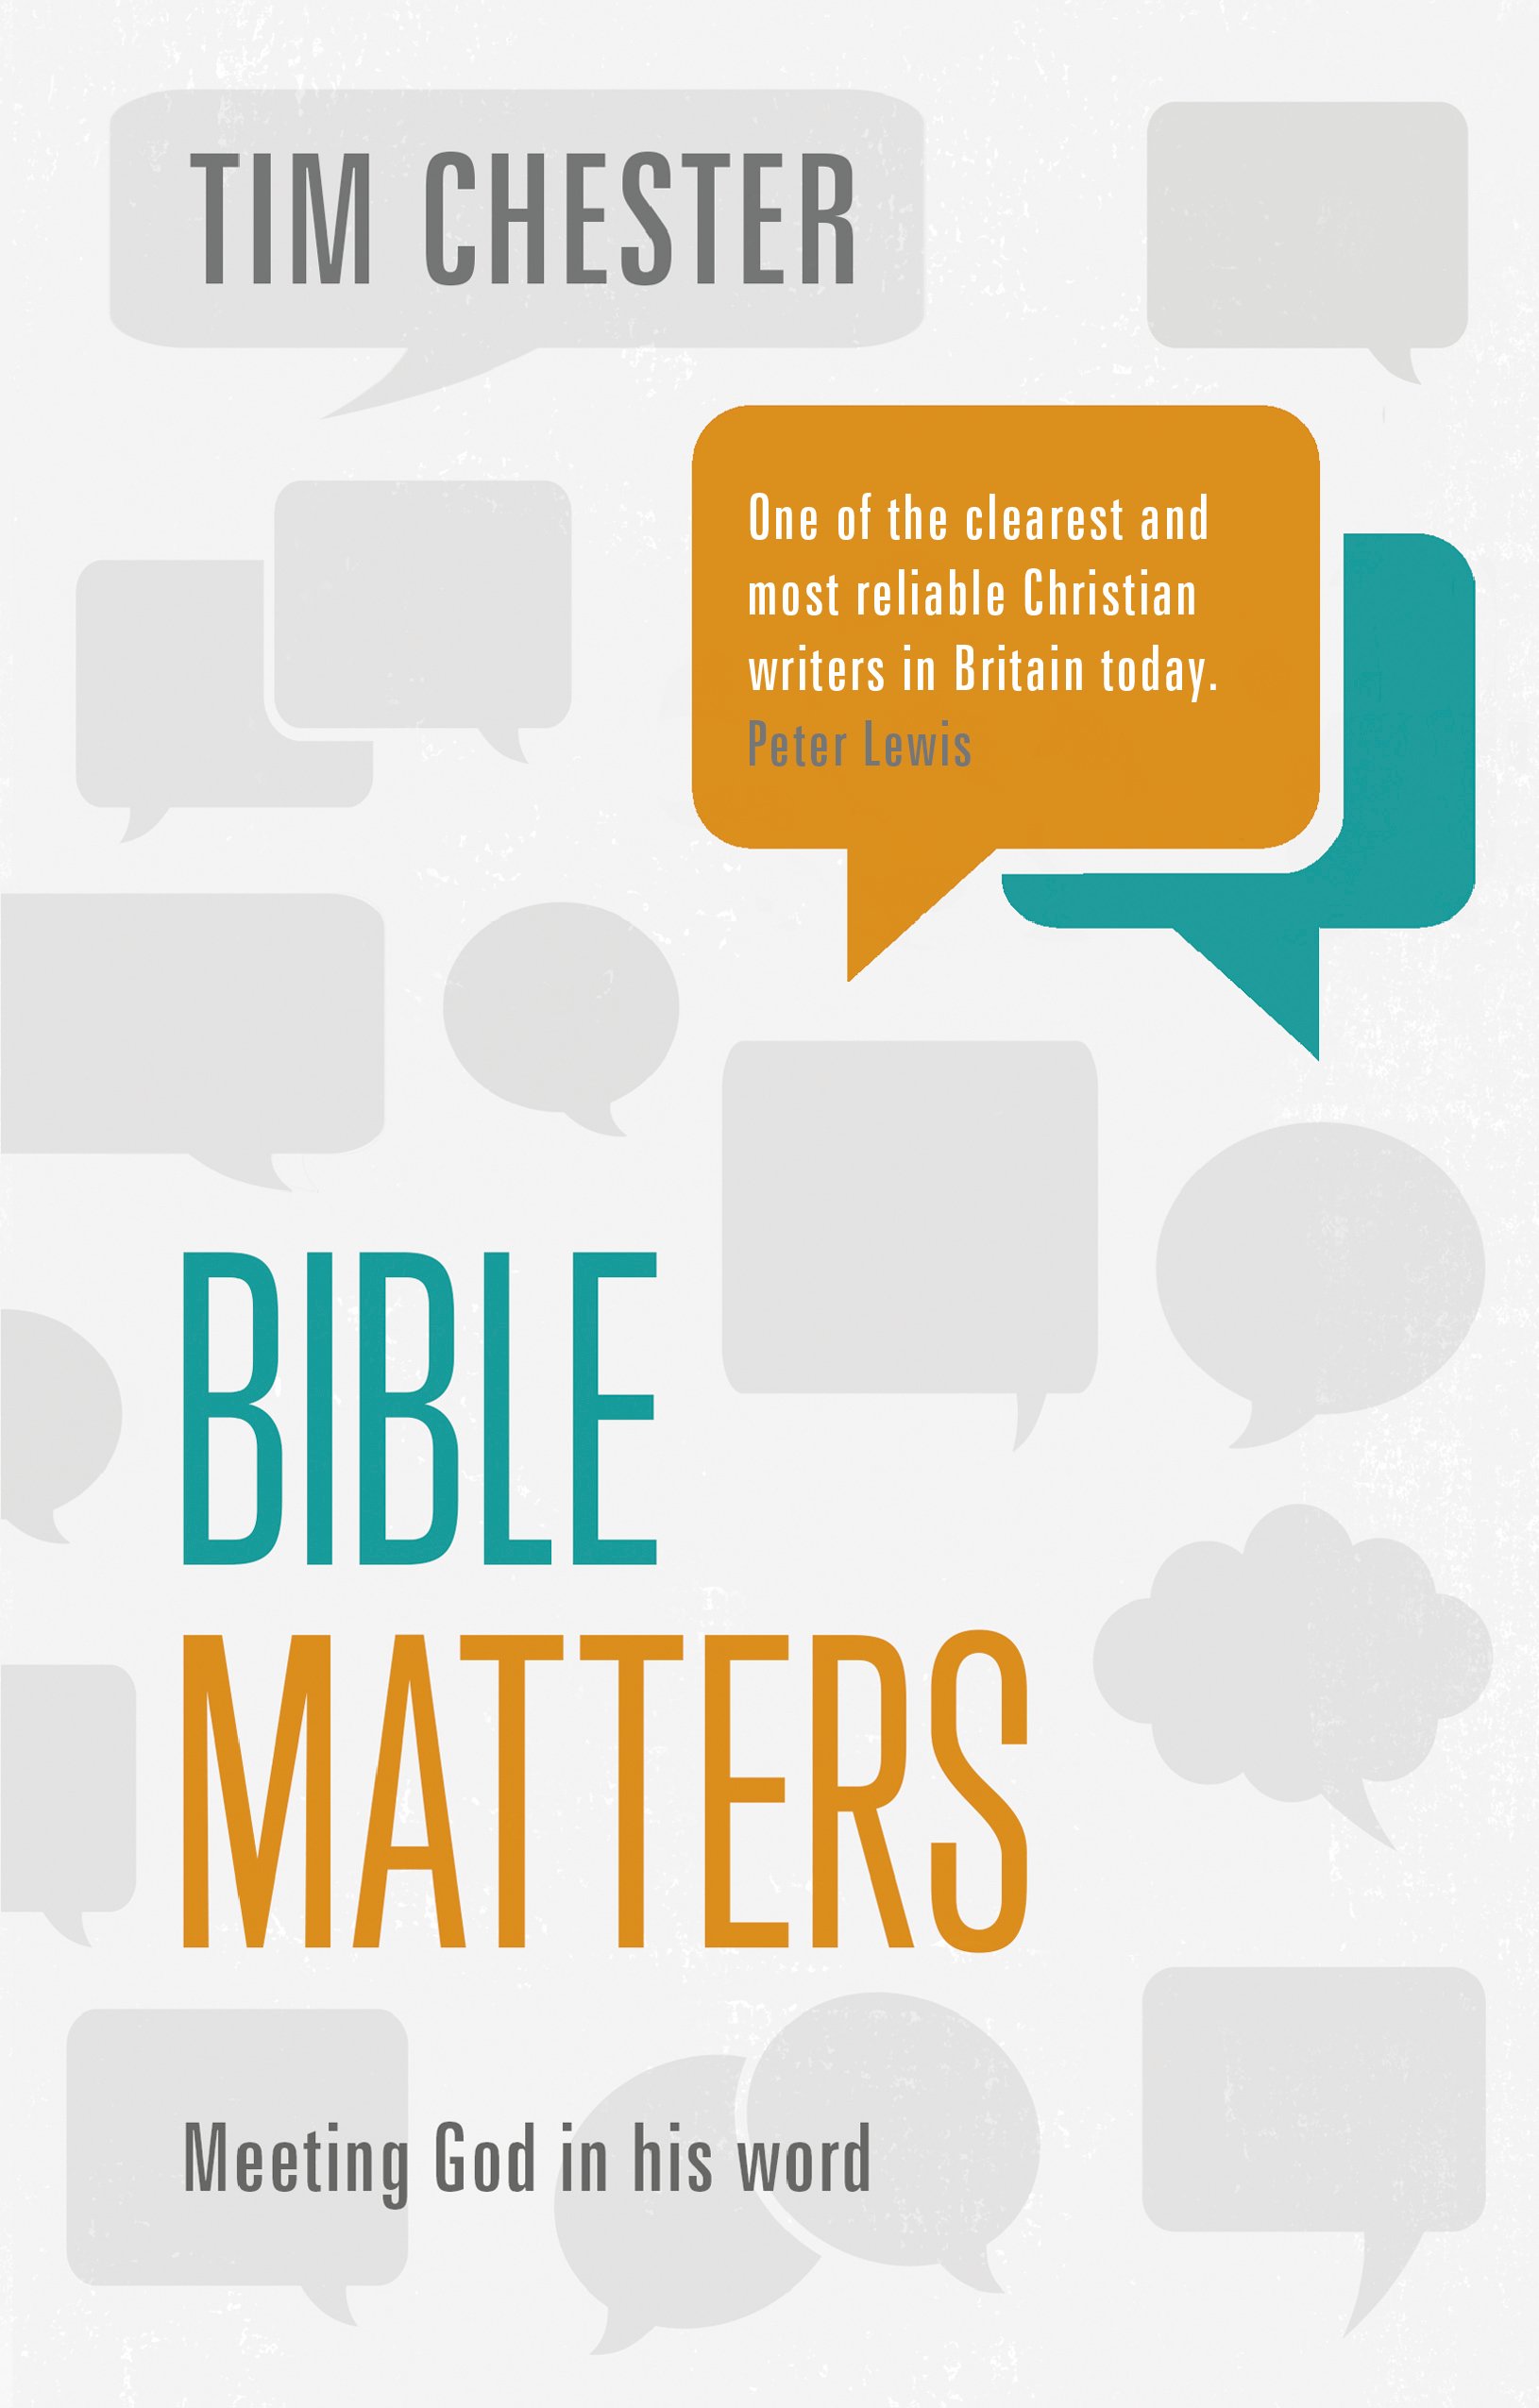 More information on Bible Matters Meeting God in His Word